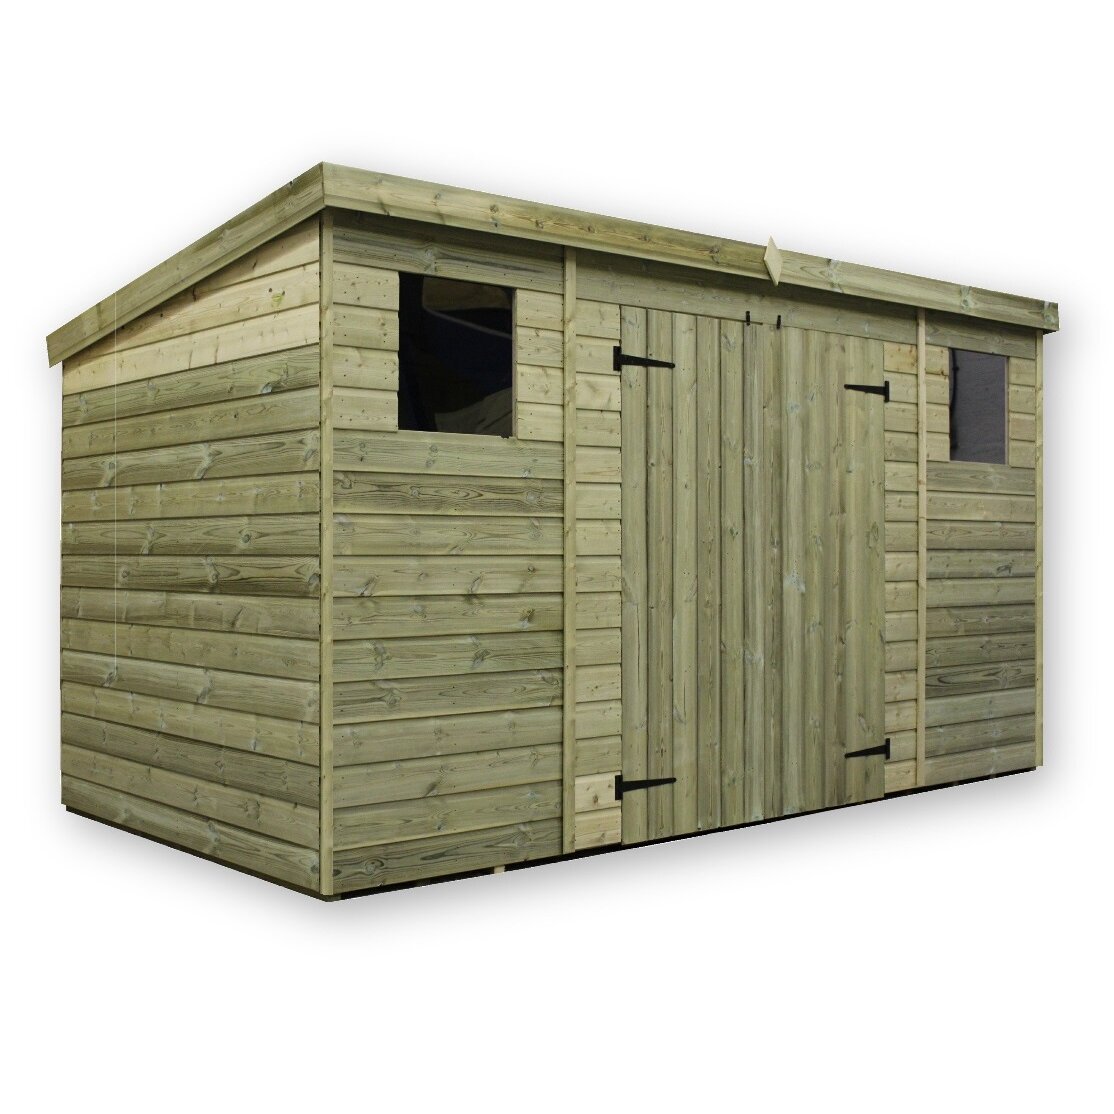 Knowing 10 x 5 lean to shed